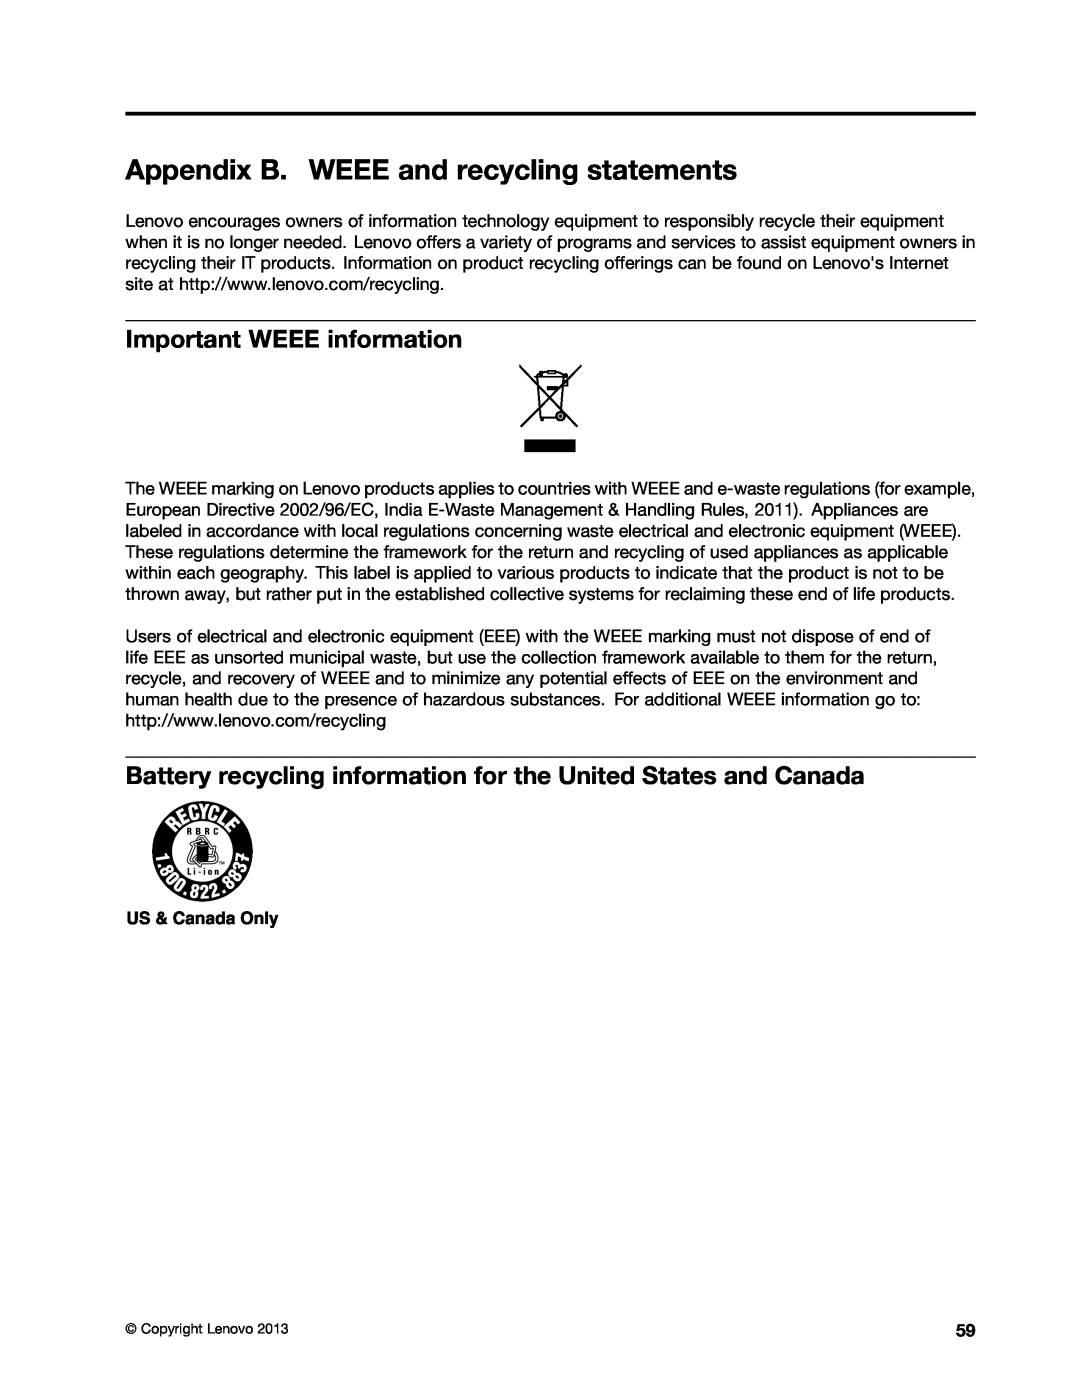 Lenovo 628323U manual Appendix B. WEEE and recycling statements, Important WEEE information 